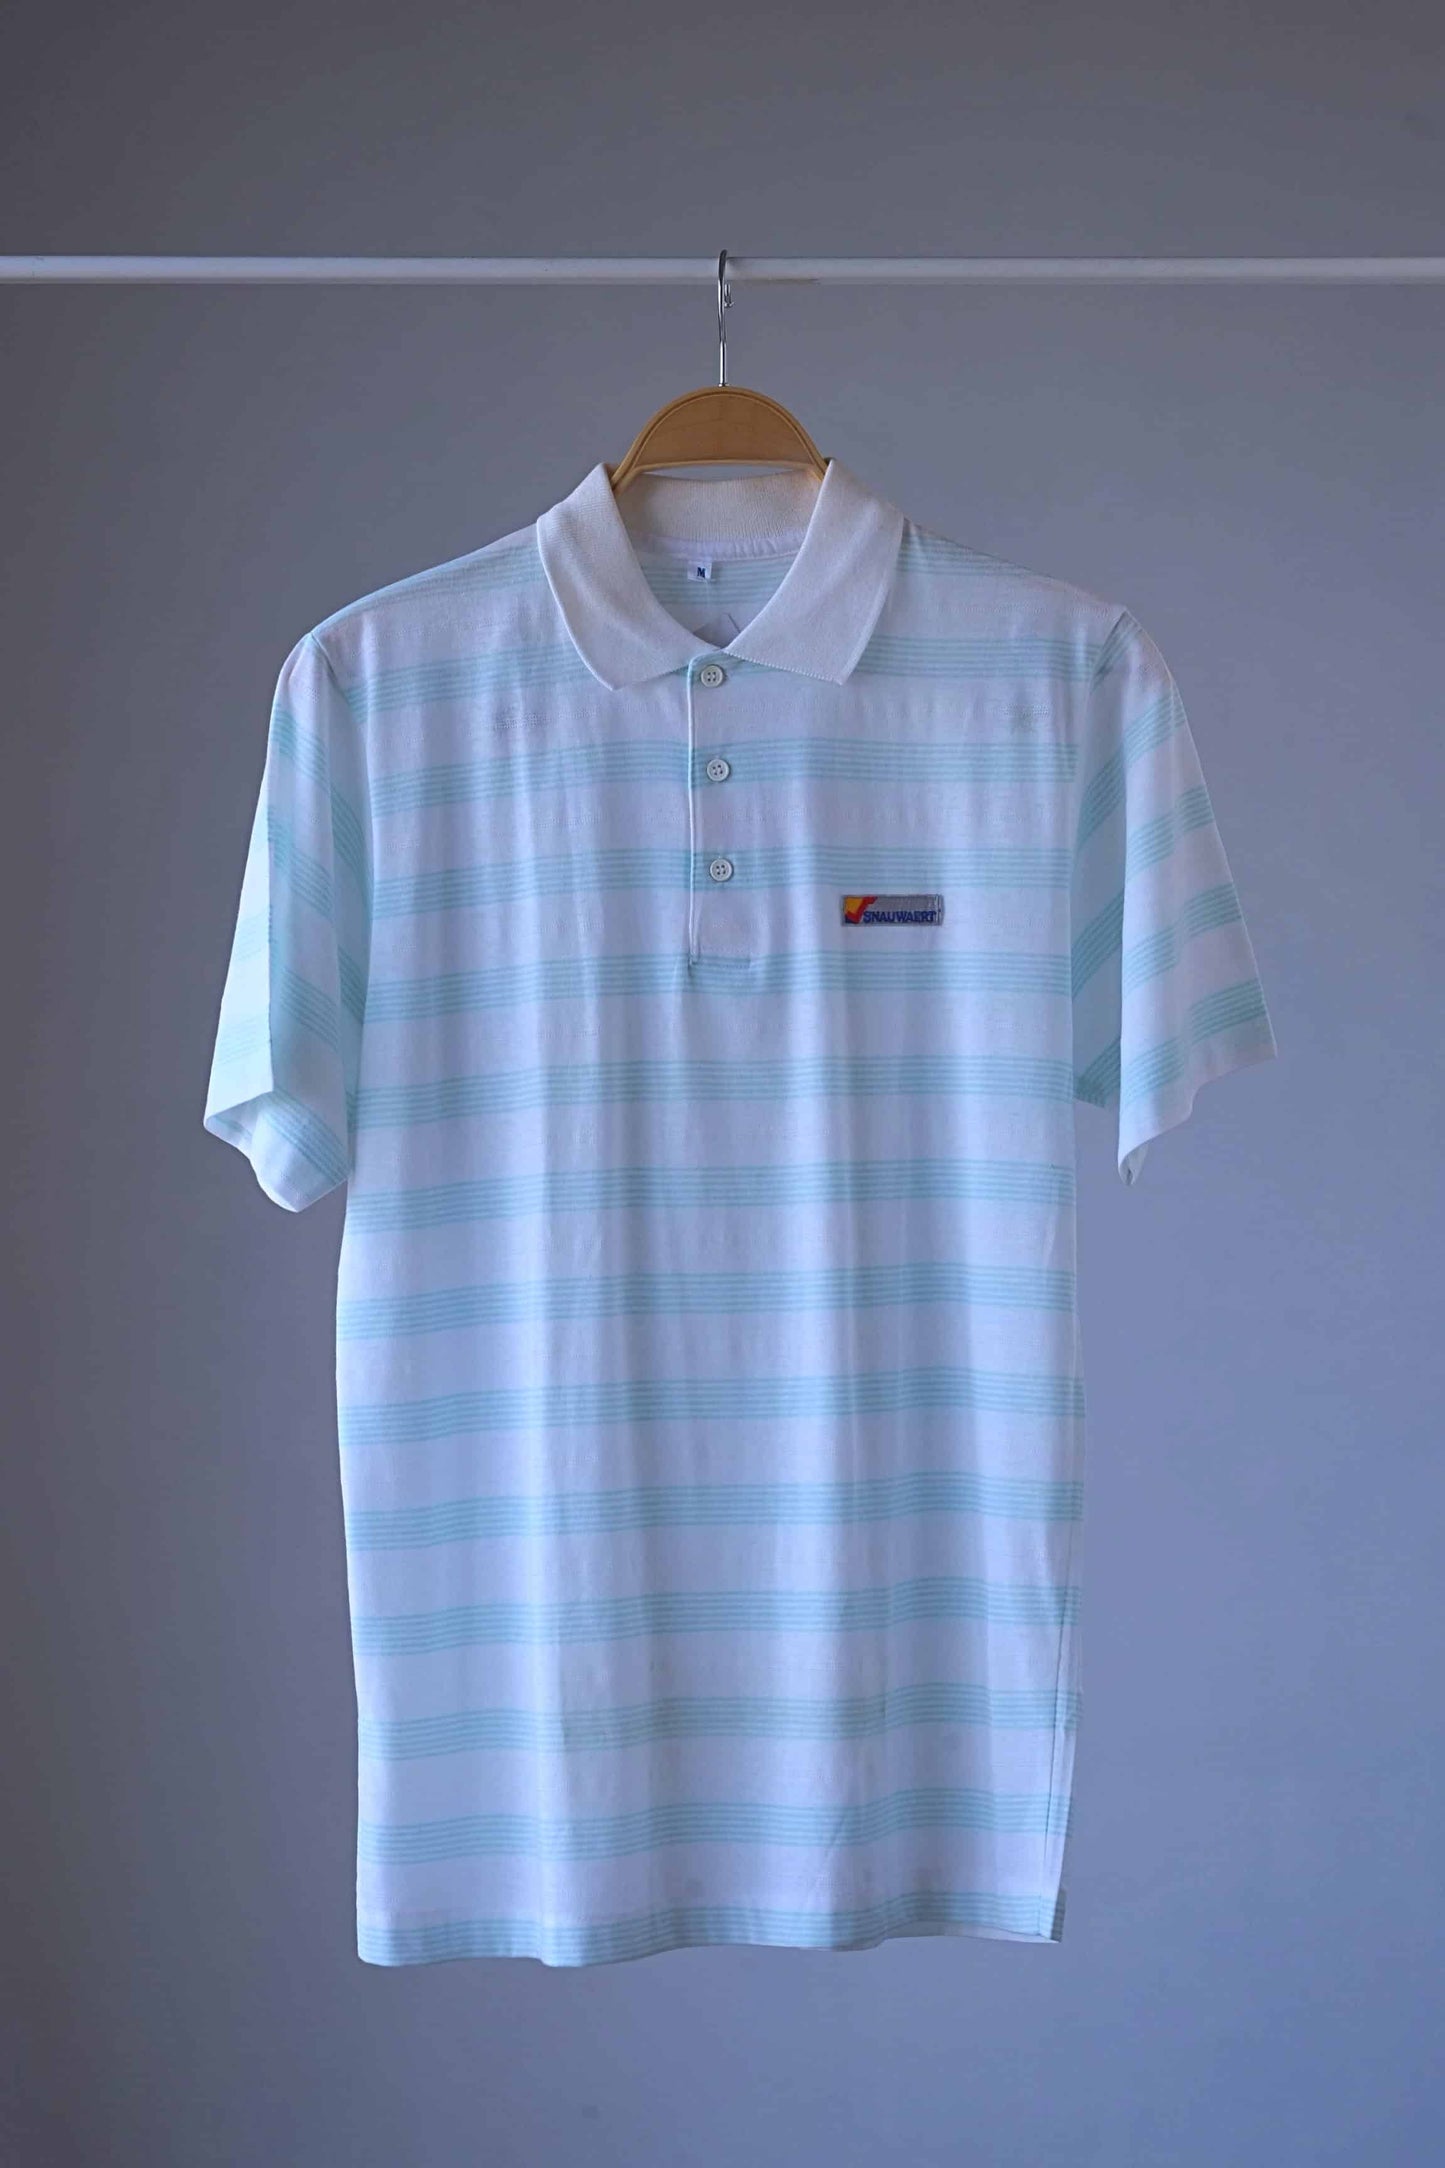 SNAUWEART Vintage Striped Polo in white and mint green